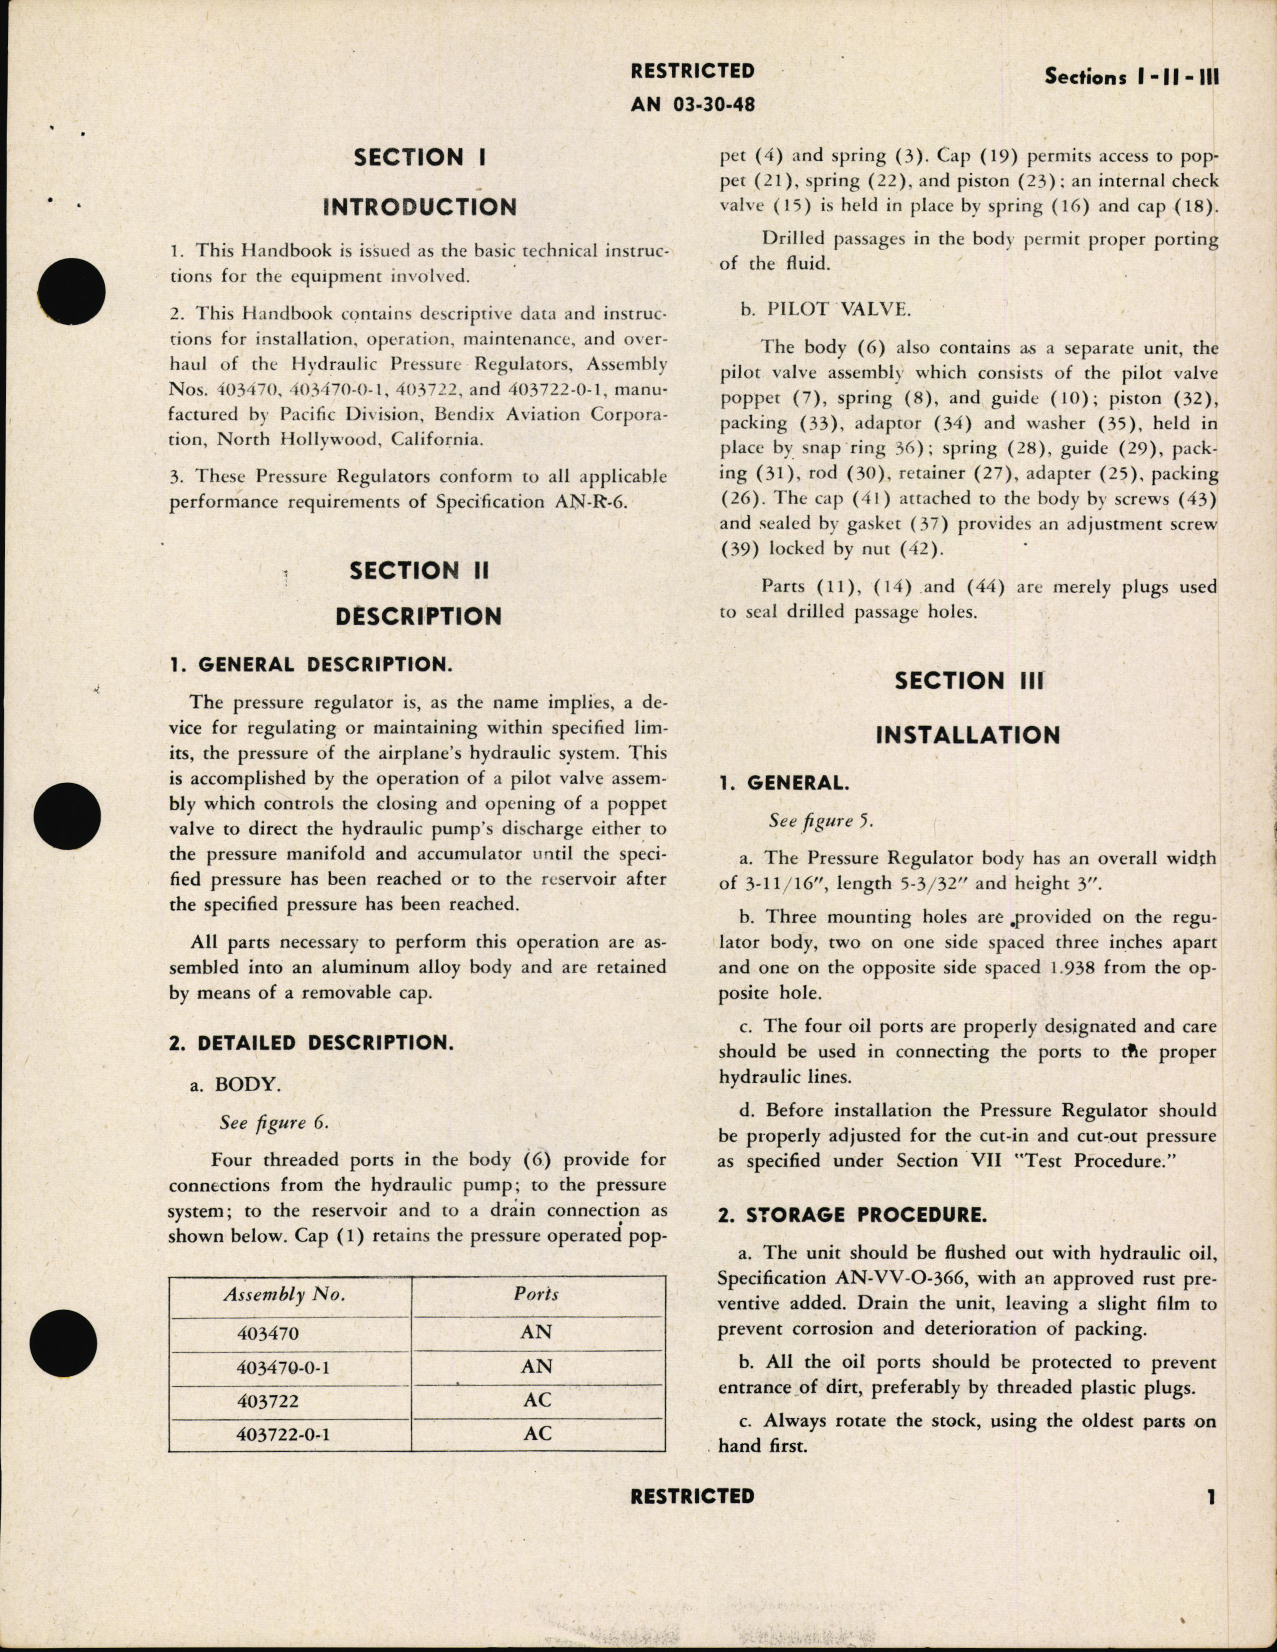 Sample page 5 from AirCorps Library document: Handbook of Instructions with Parts Catalog for Hydraulic Pressure Regulators